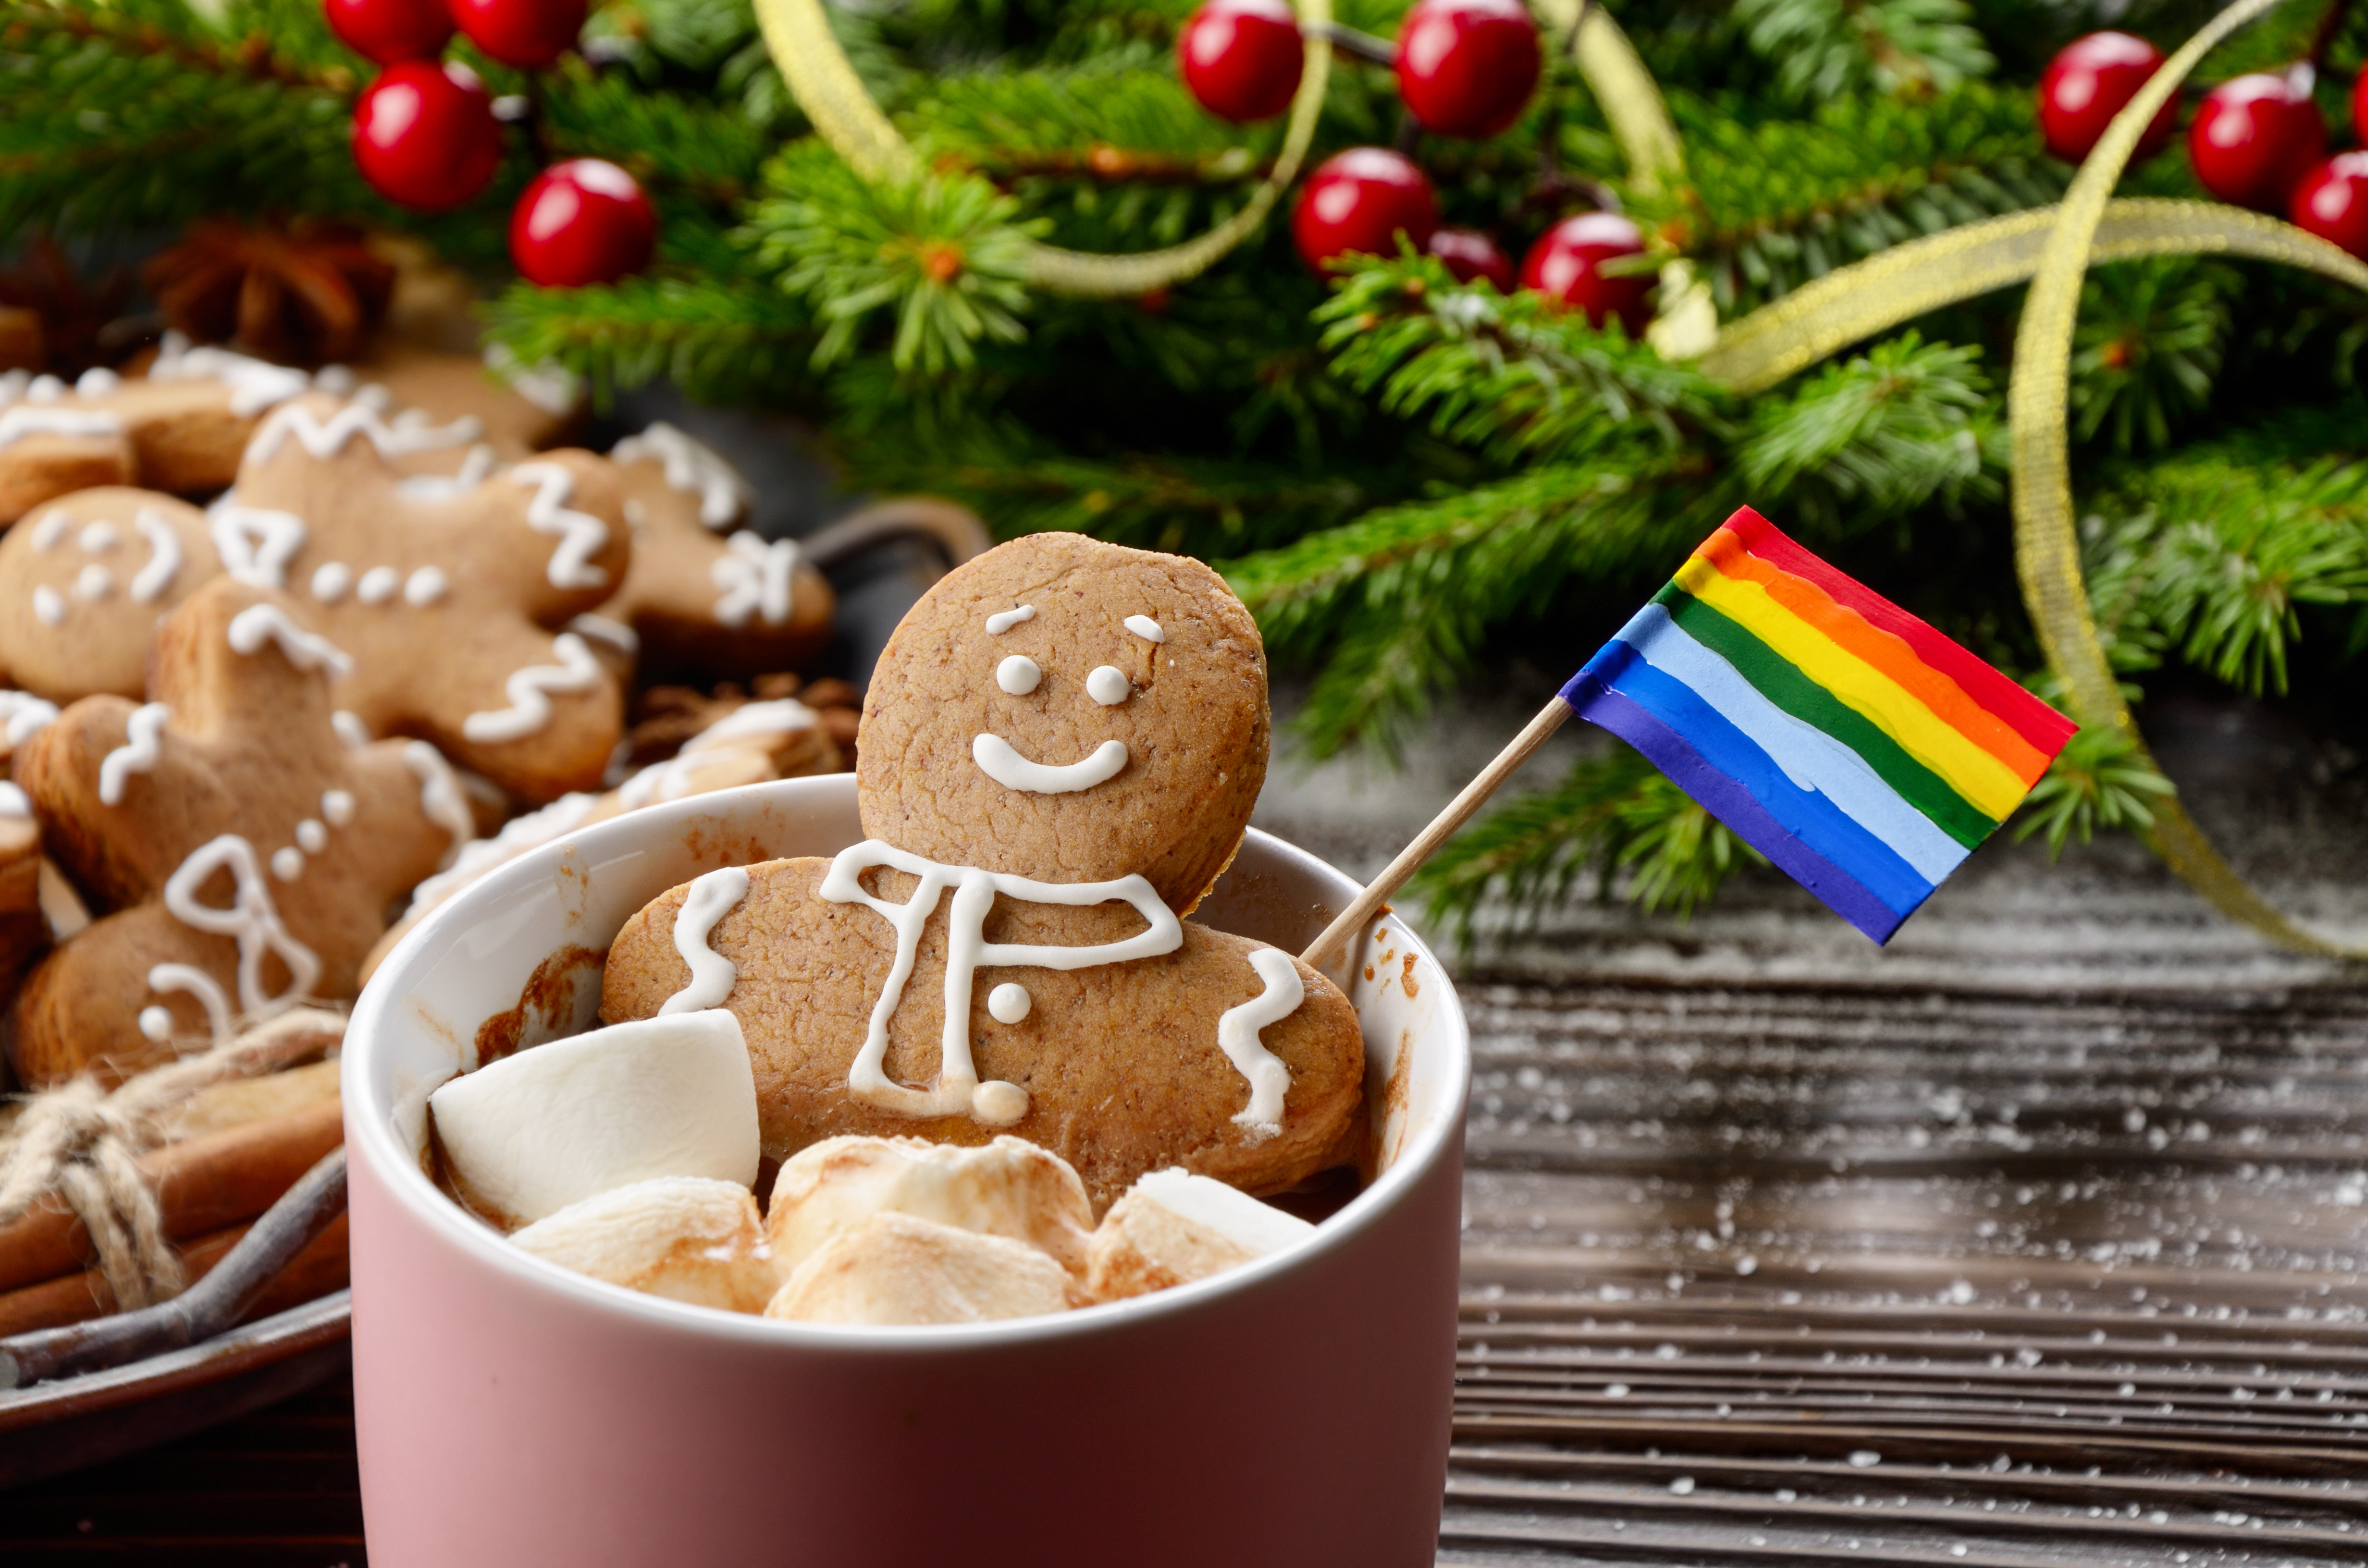 Catholic League president Bill Donoohue is very upset about gay Christmas celebrations